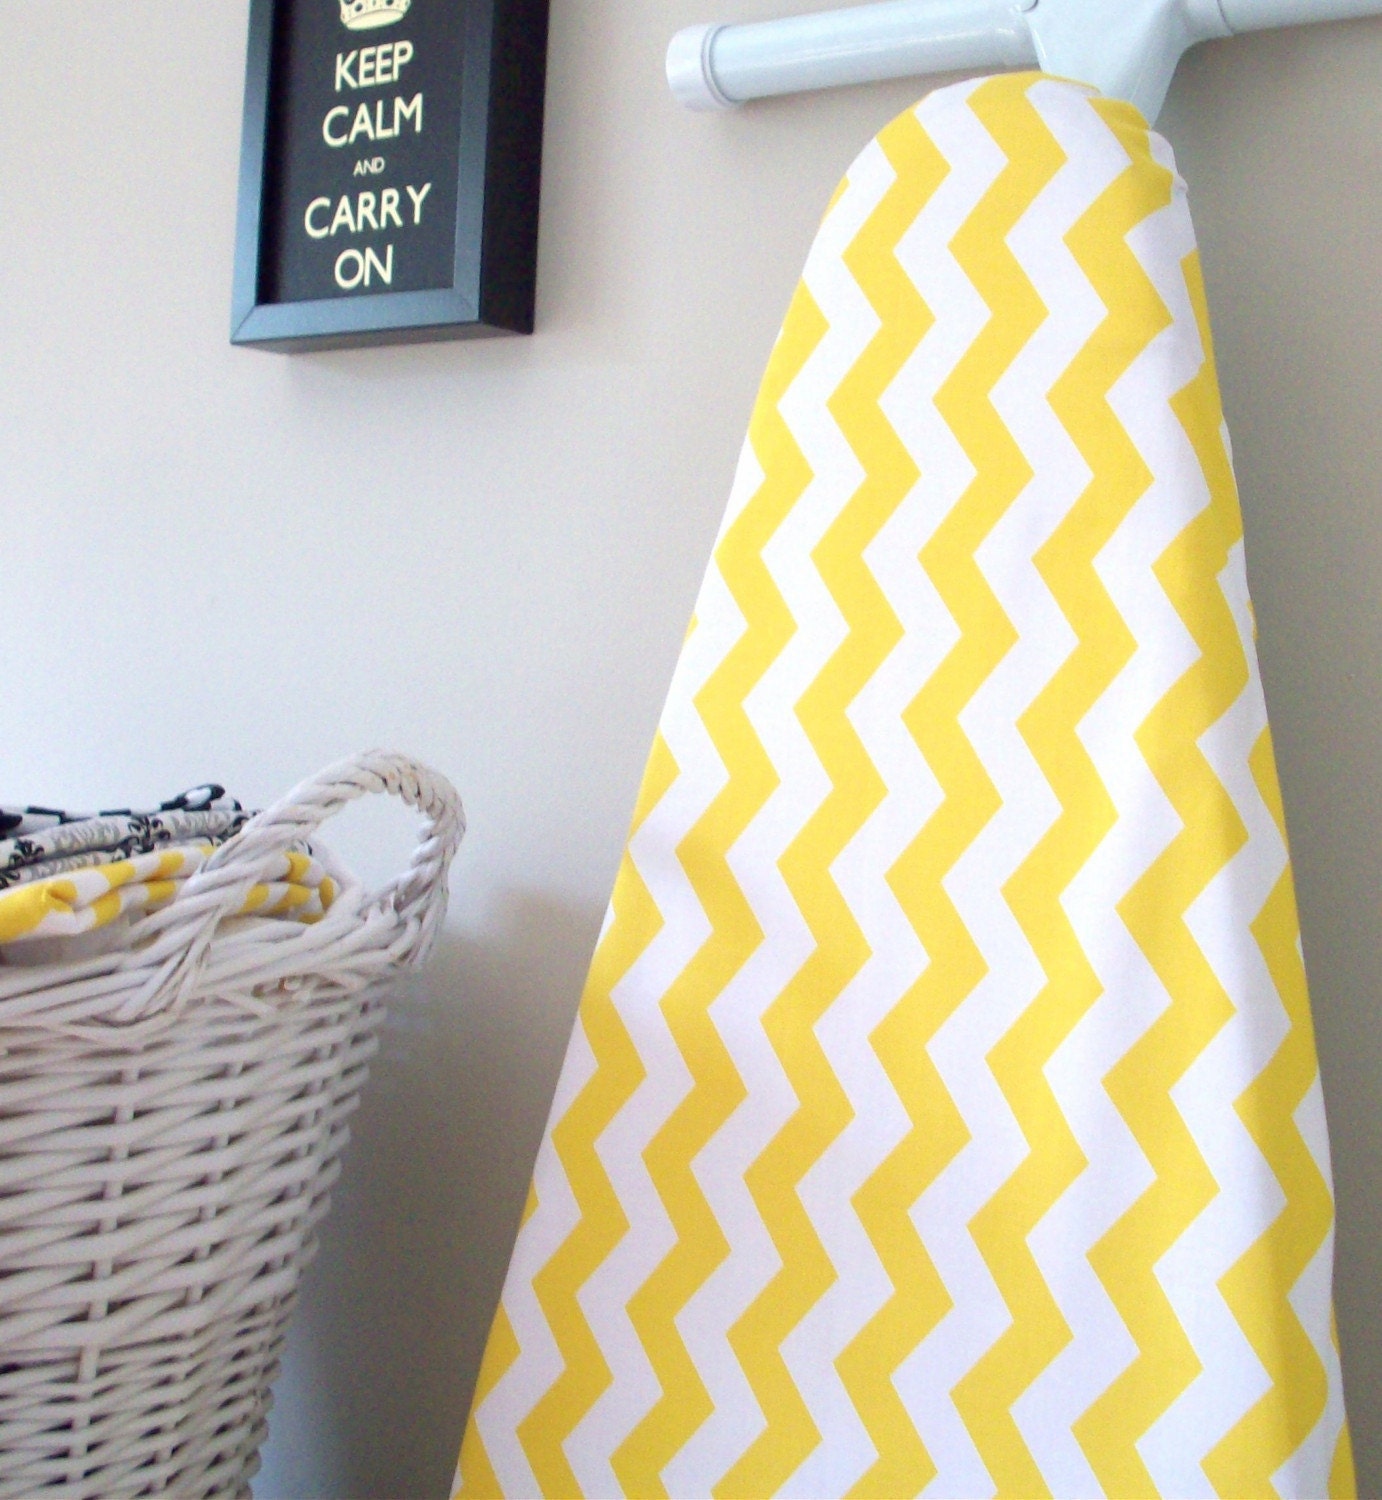 LAST ONE - Chevron Ironing Board Cover in Yellow and White